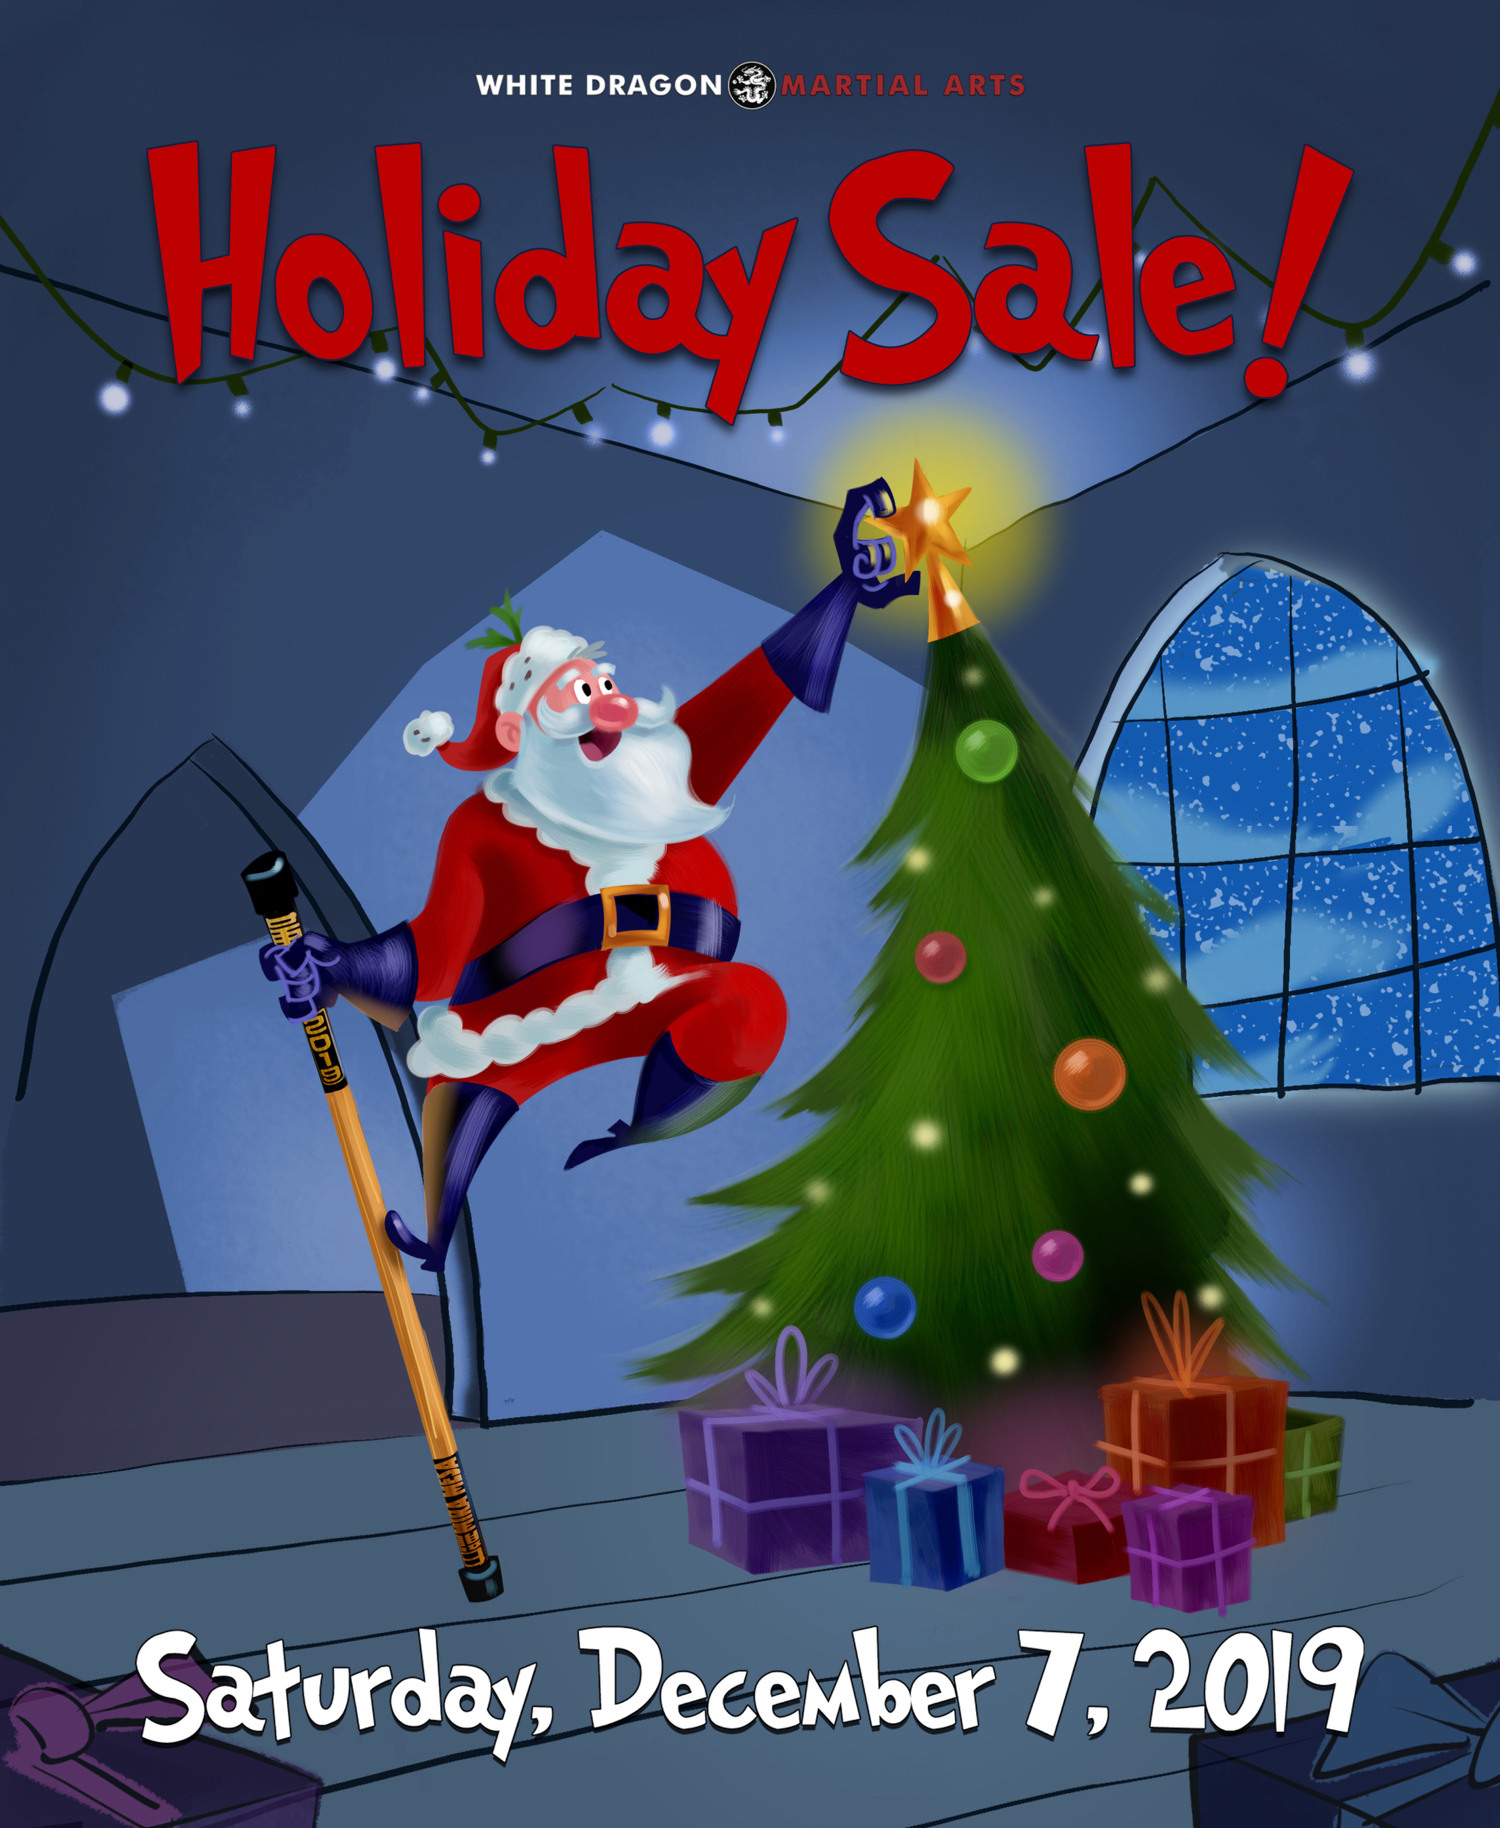 White Dragon Martial Arts - Holiday Sale 2019